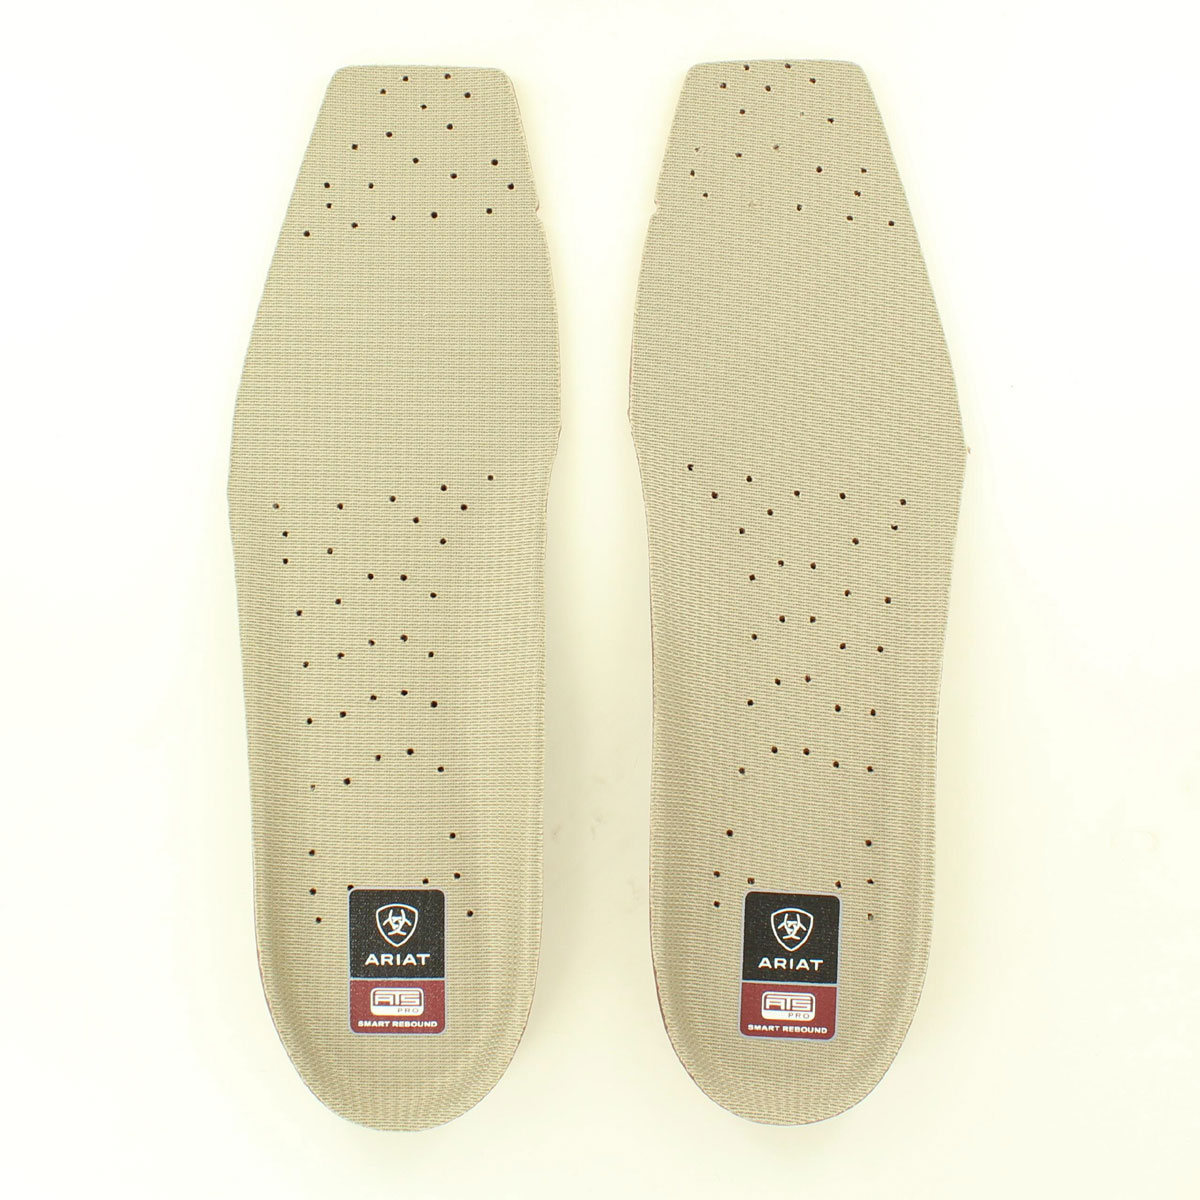 A10008013-15 Mens Footbed Wide Square Toe - Size 15